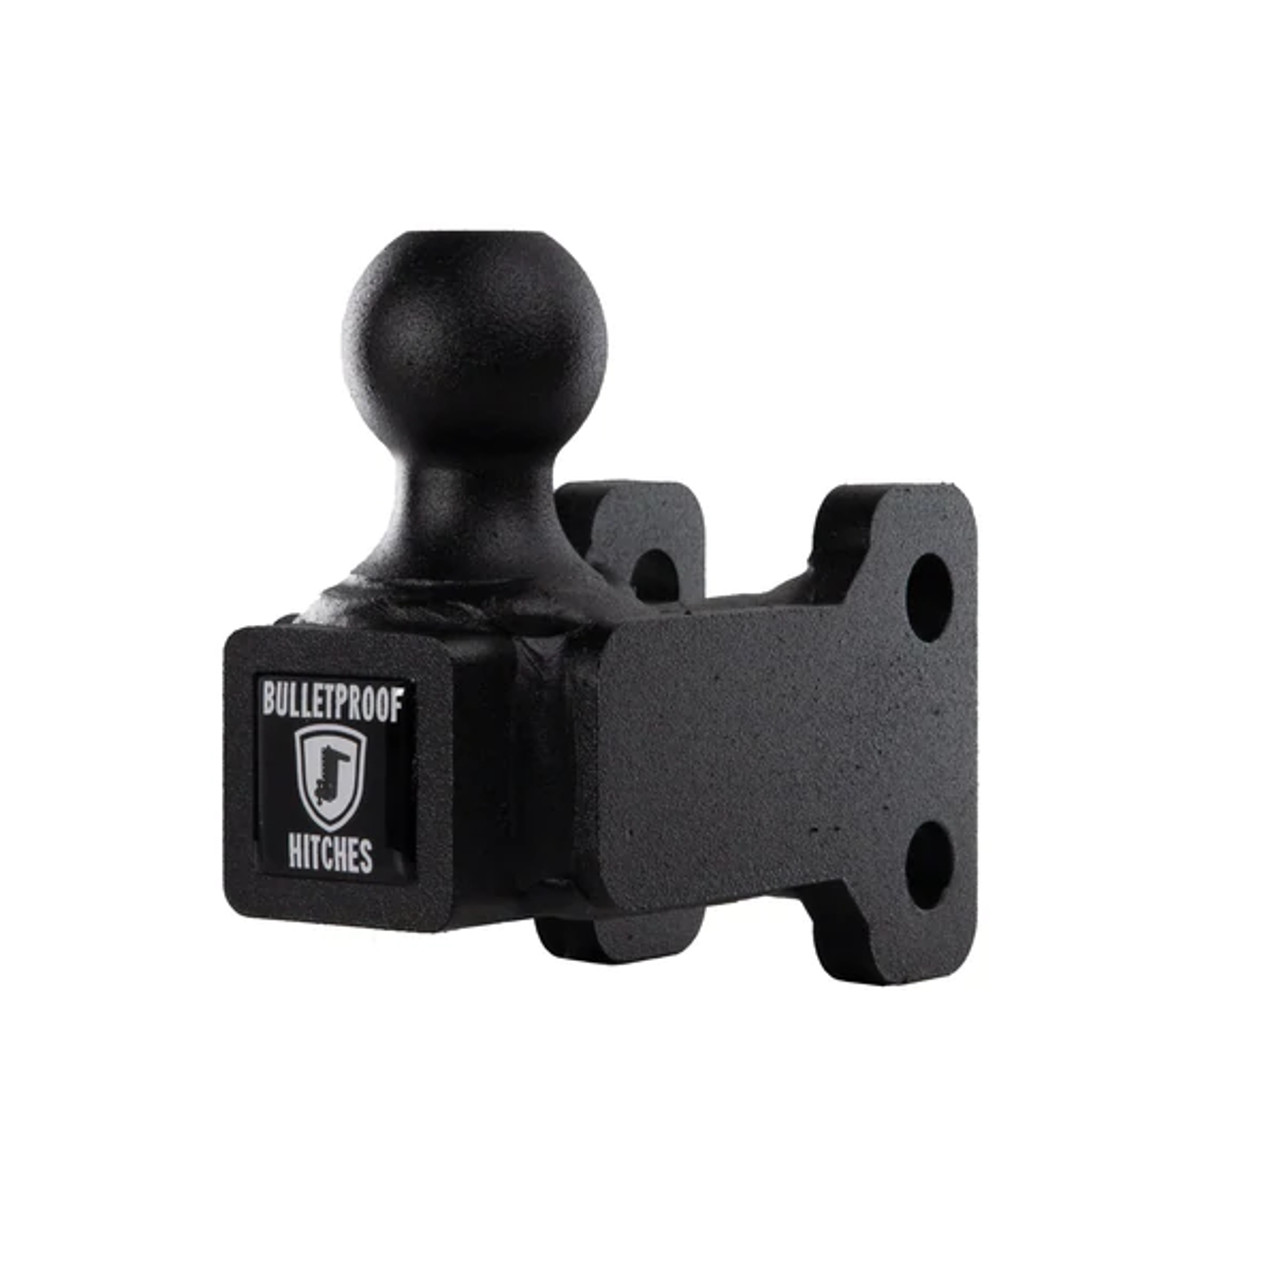 BULLETPROOF 1-7/8" SINGLE BALL MOUNT-Other View